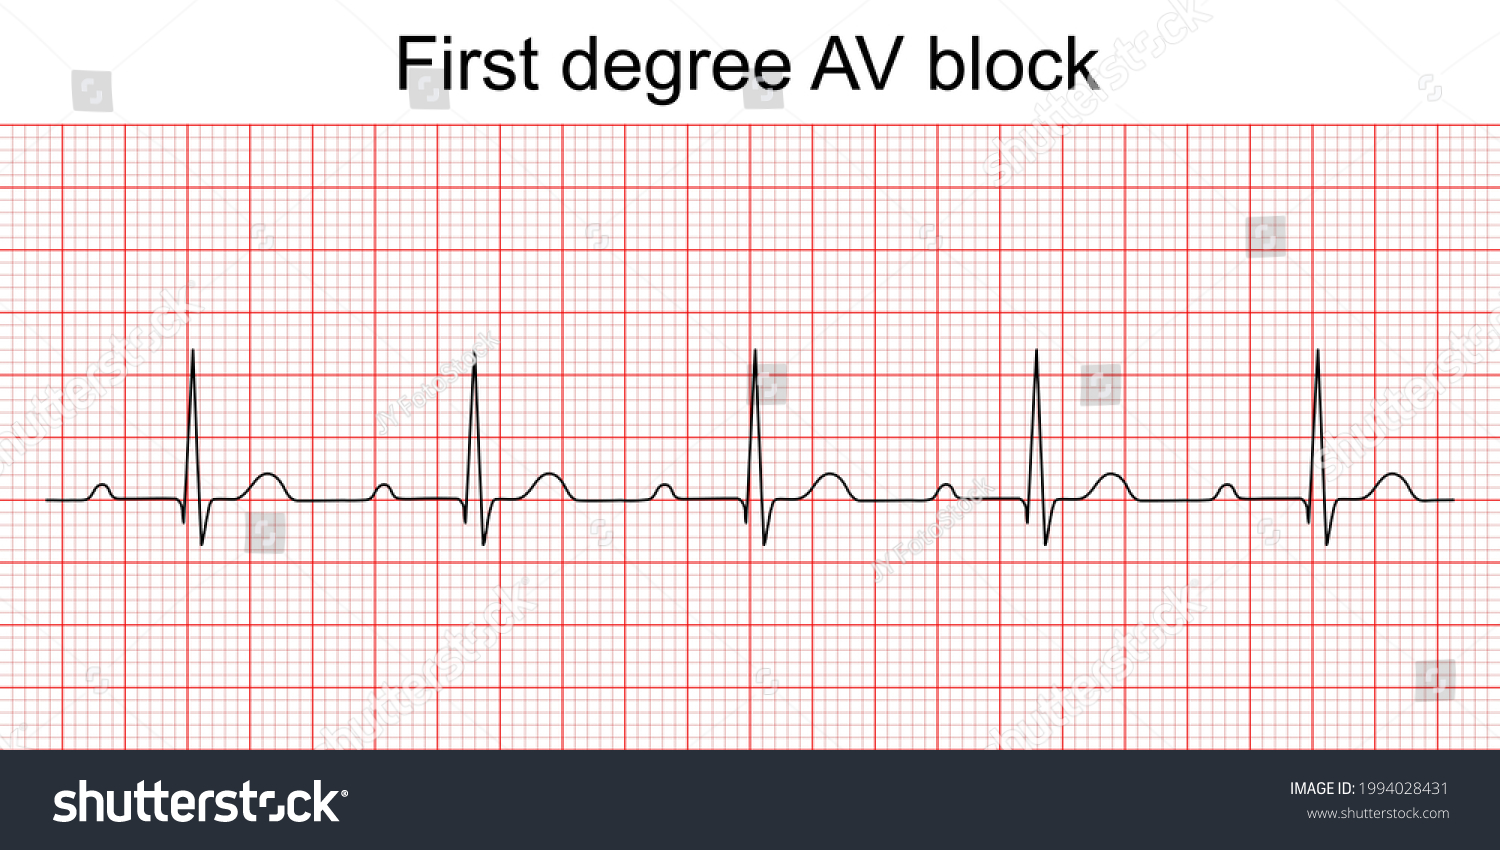 At with first degree av block Images, Stock Photos & Vectors | Shutterstock